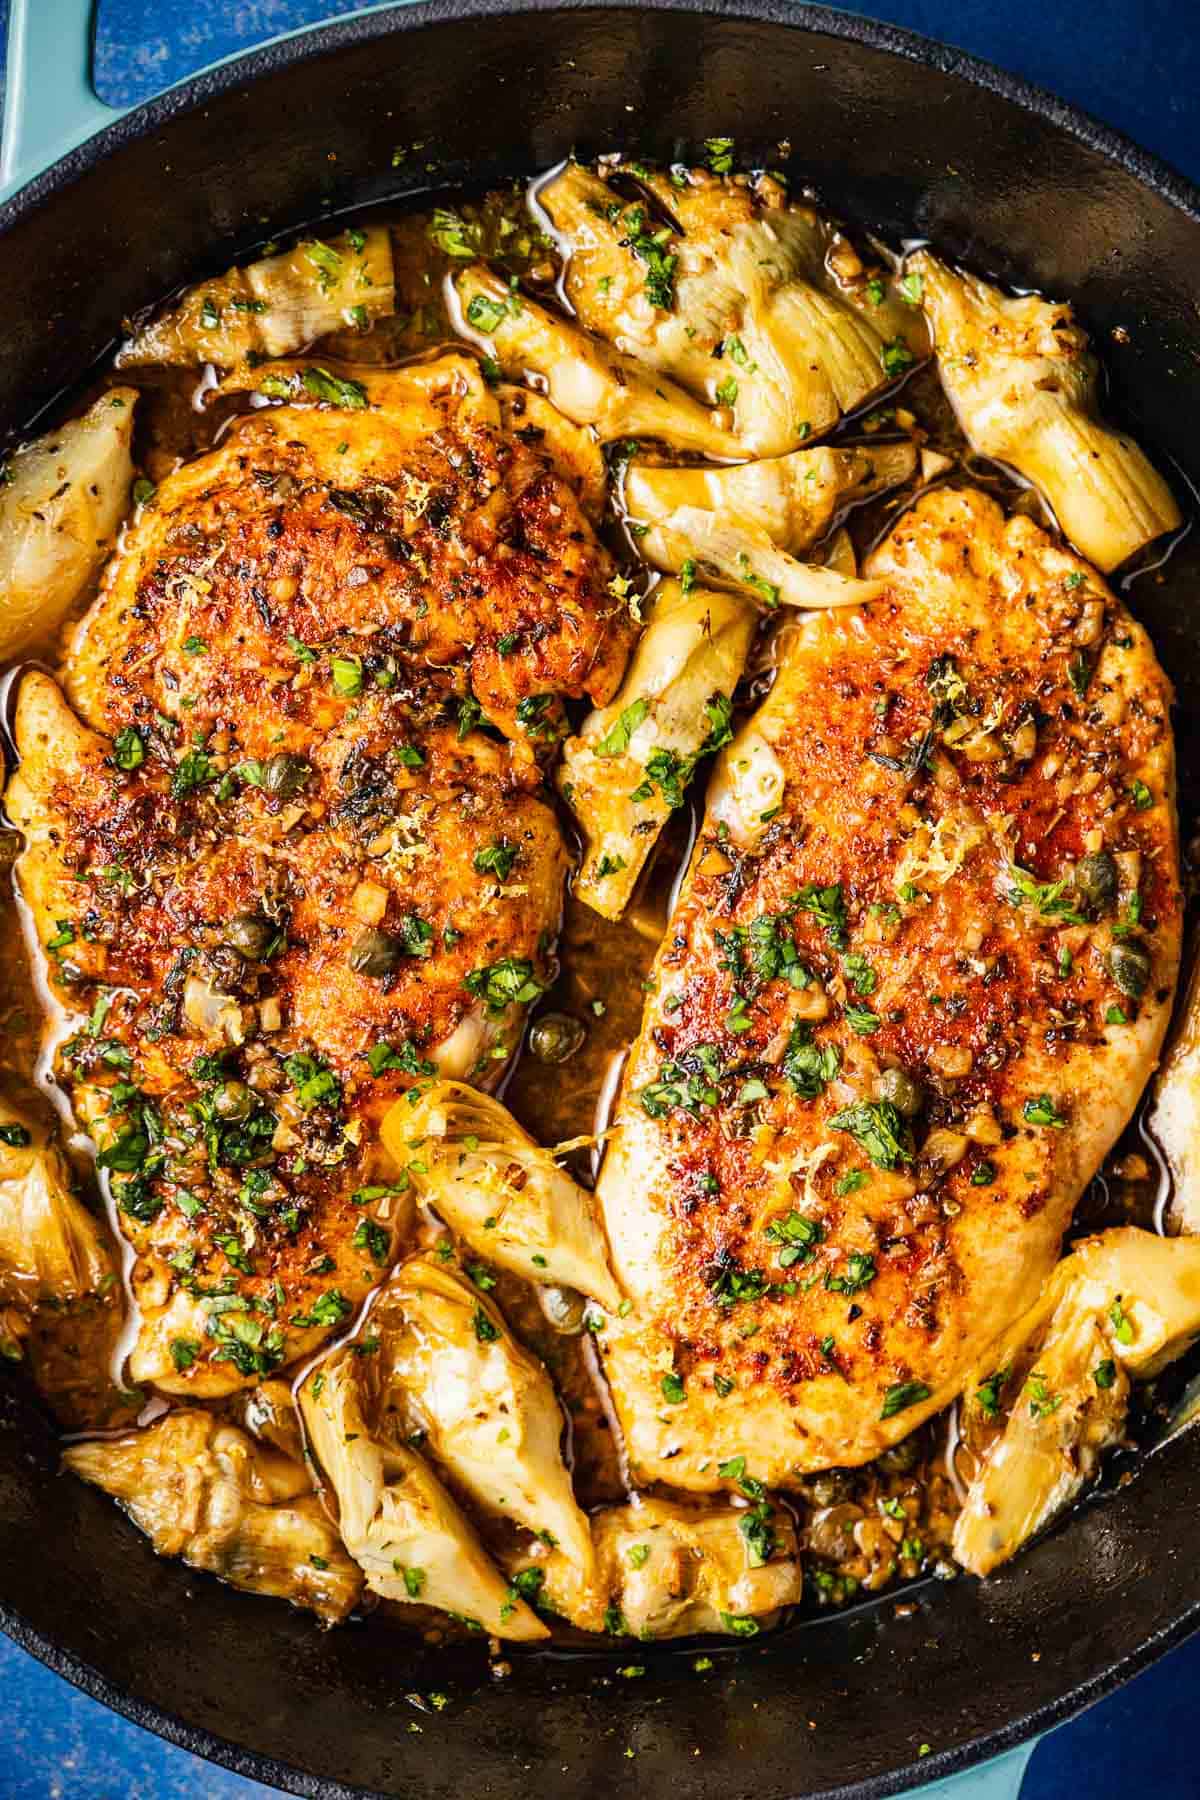 Baked Chicken Breasts in an Artichoke and White Wine Sauce